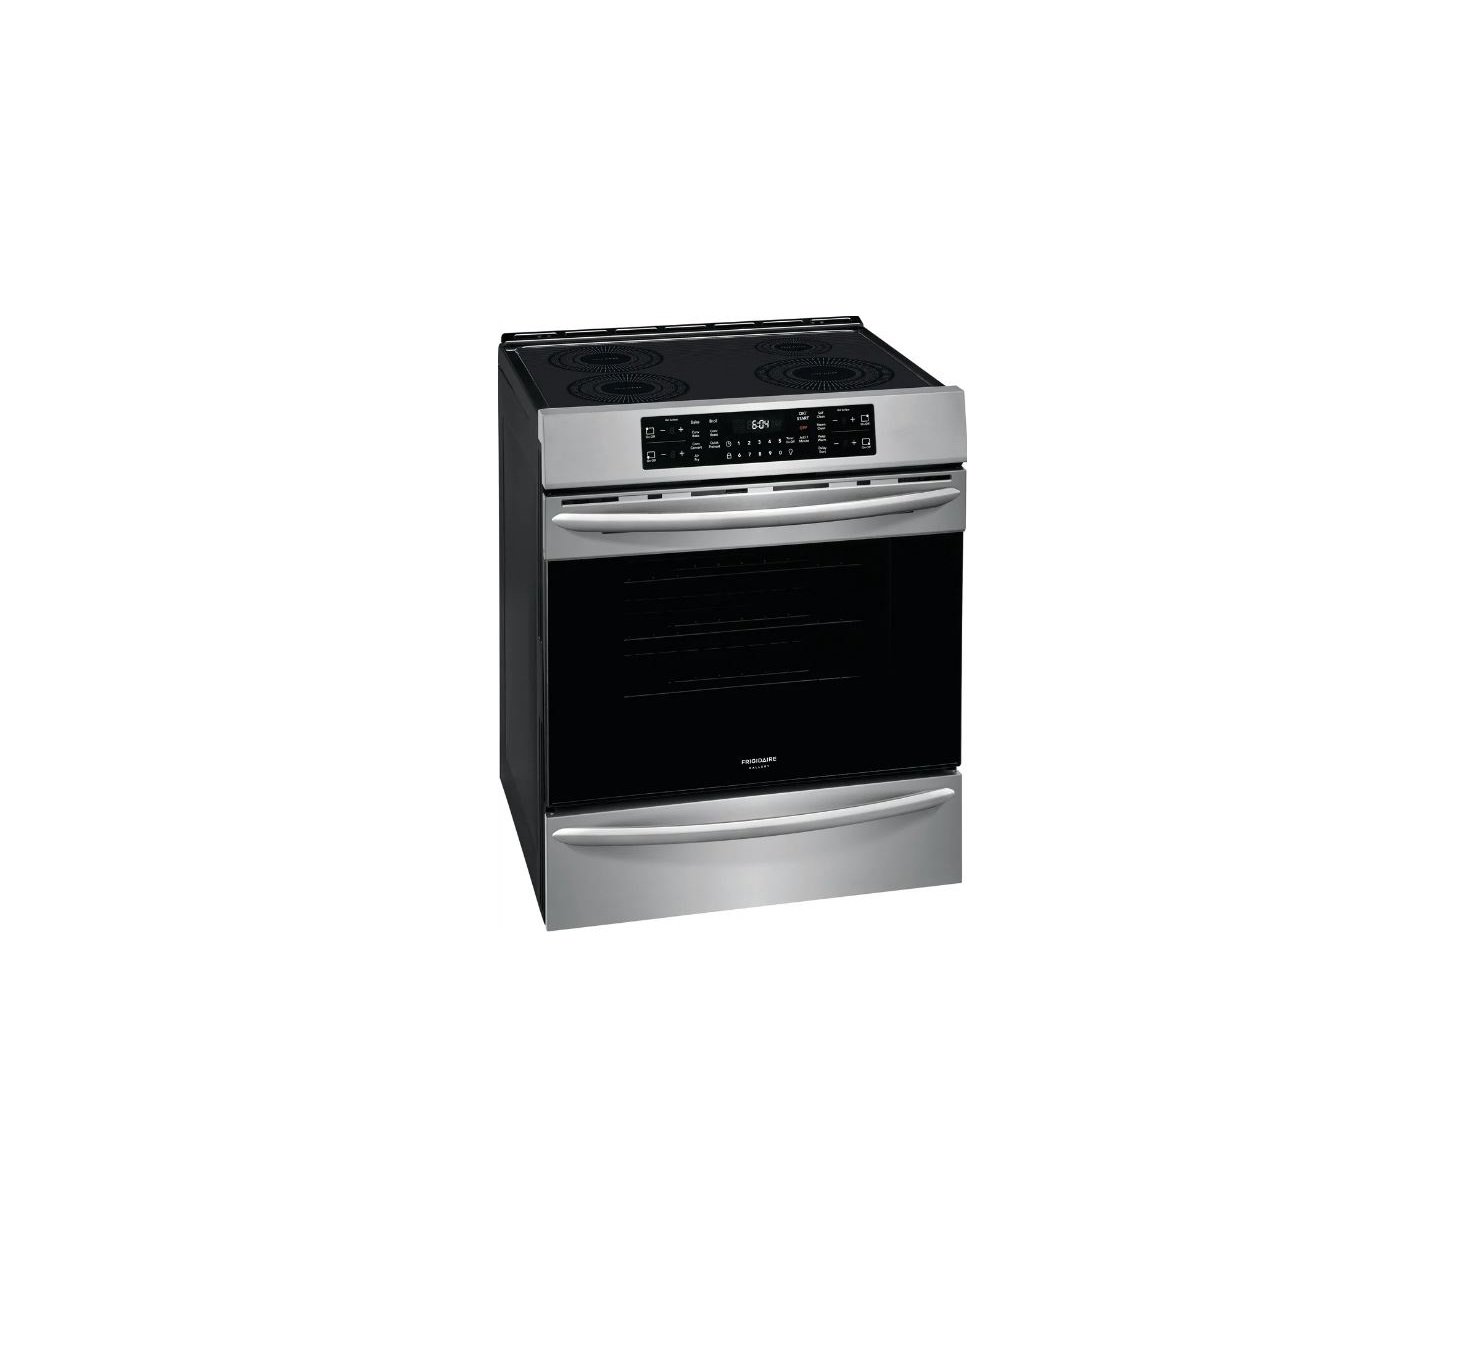 Frigidaire Gallery 30'' fgih3047vf Front Control Induction Range with Air Fry User Manual - feature image